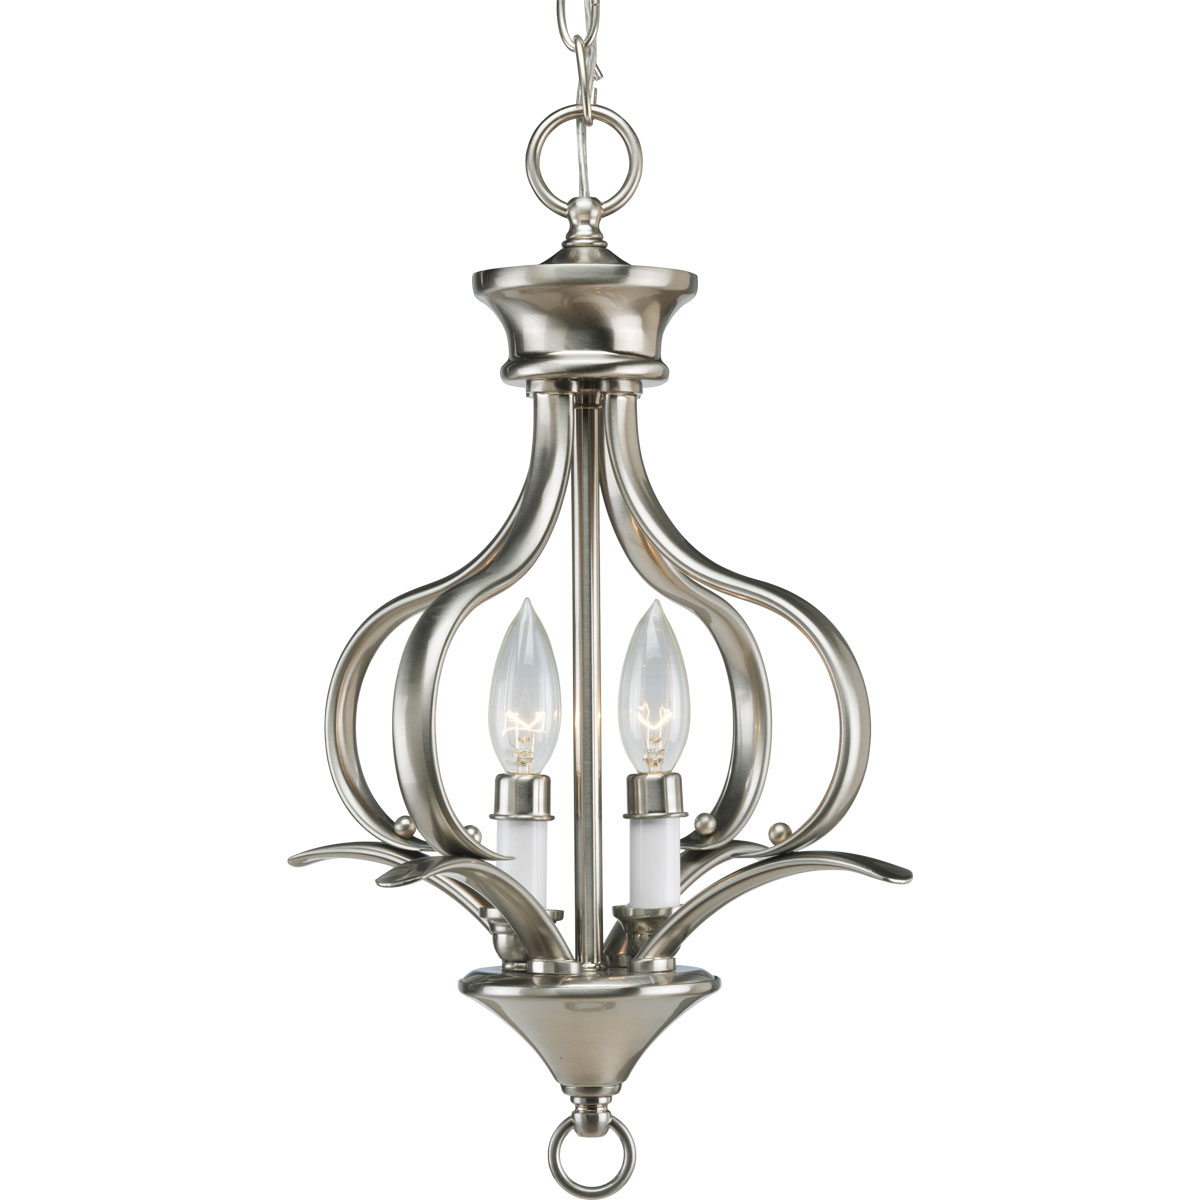 Two-light foyer fixture featuring soft angles, curving lines. Gracefully exotic, the Trinity Collection offers classic sophistication for transitional interiors. Sculptural forms of metal are enhanced by a classic finish. This transitional style can transform a room or your whole home with its charming versatility. Brushed Nickel finish.